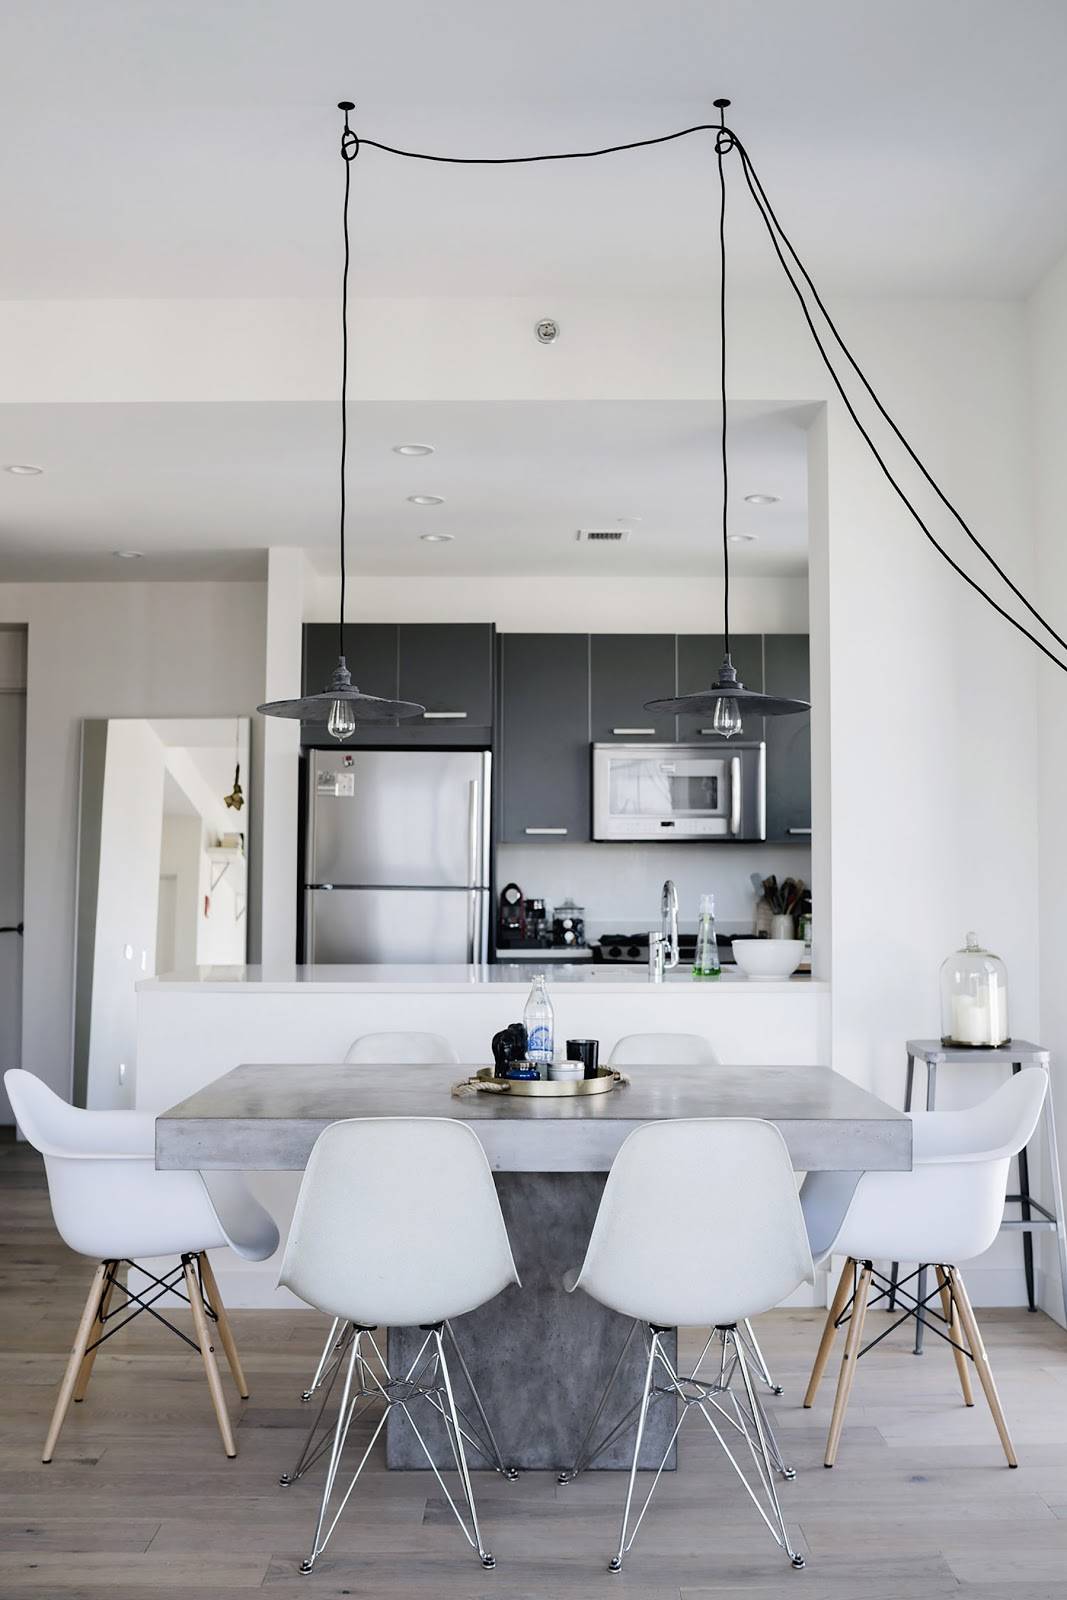 The concrete table with stainless steel chair leg design, pendant lights are the highlights for this kitchen which is neat, simple and clean.